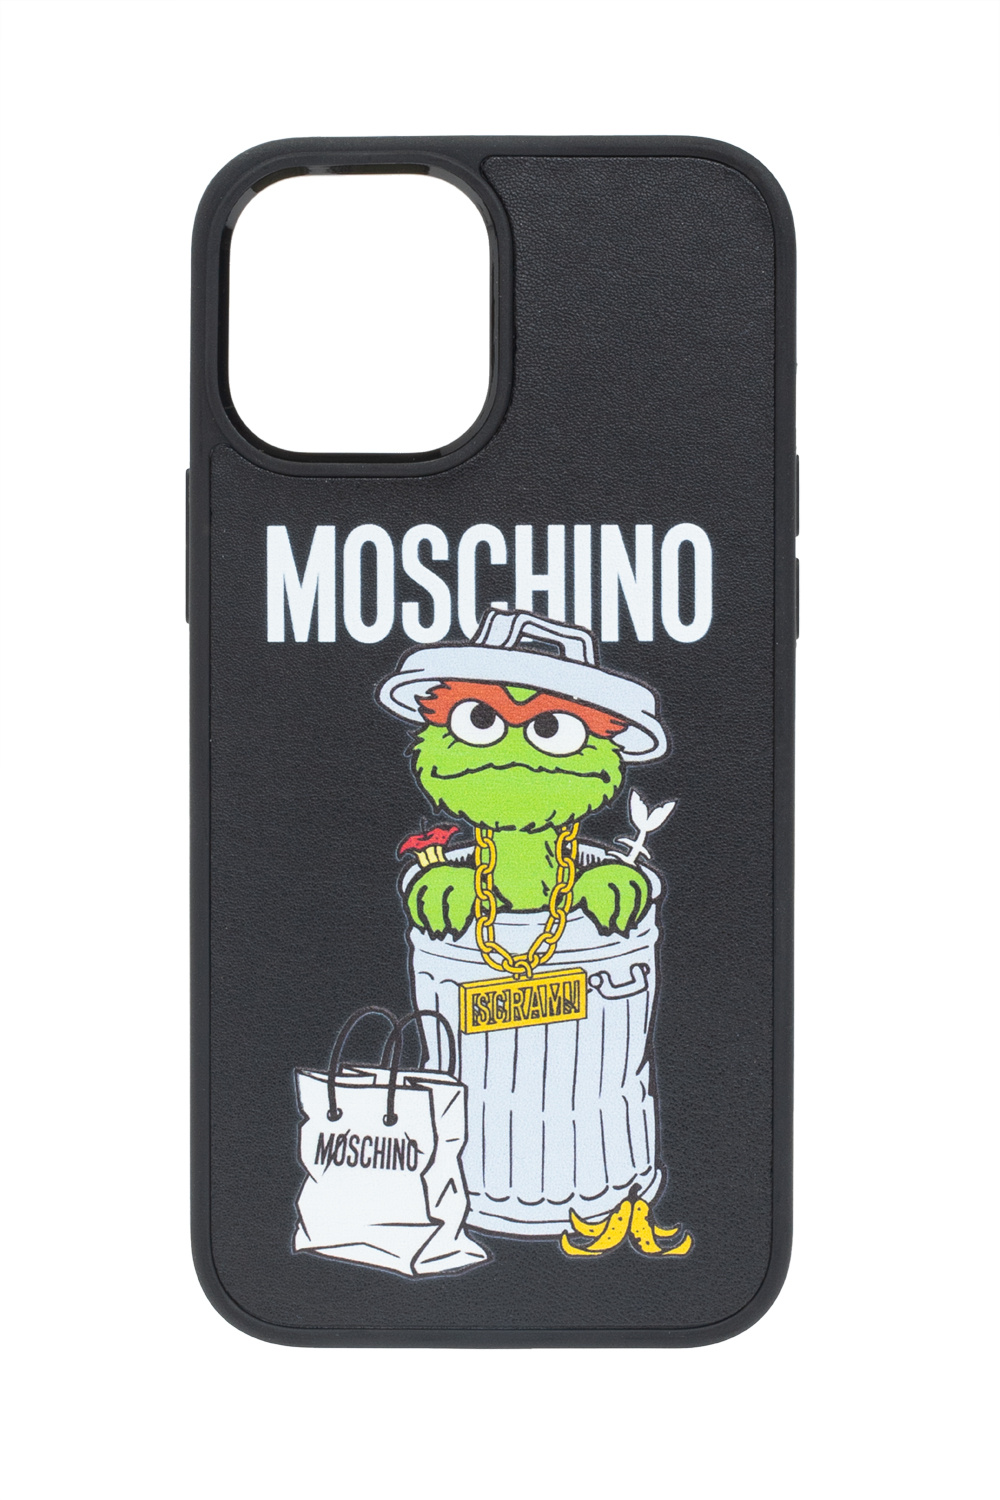 Moschino iPhone 12 Pro Max case with logo